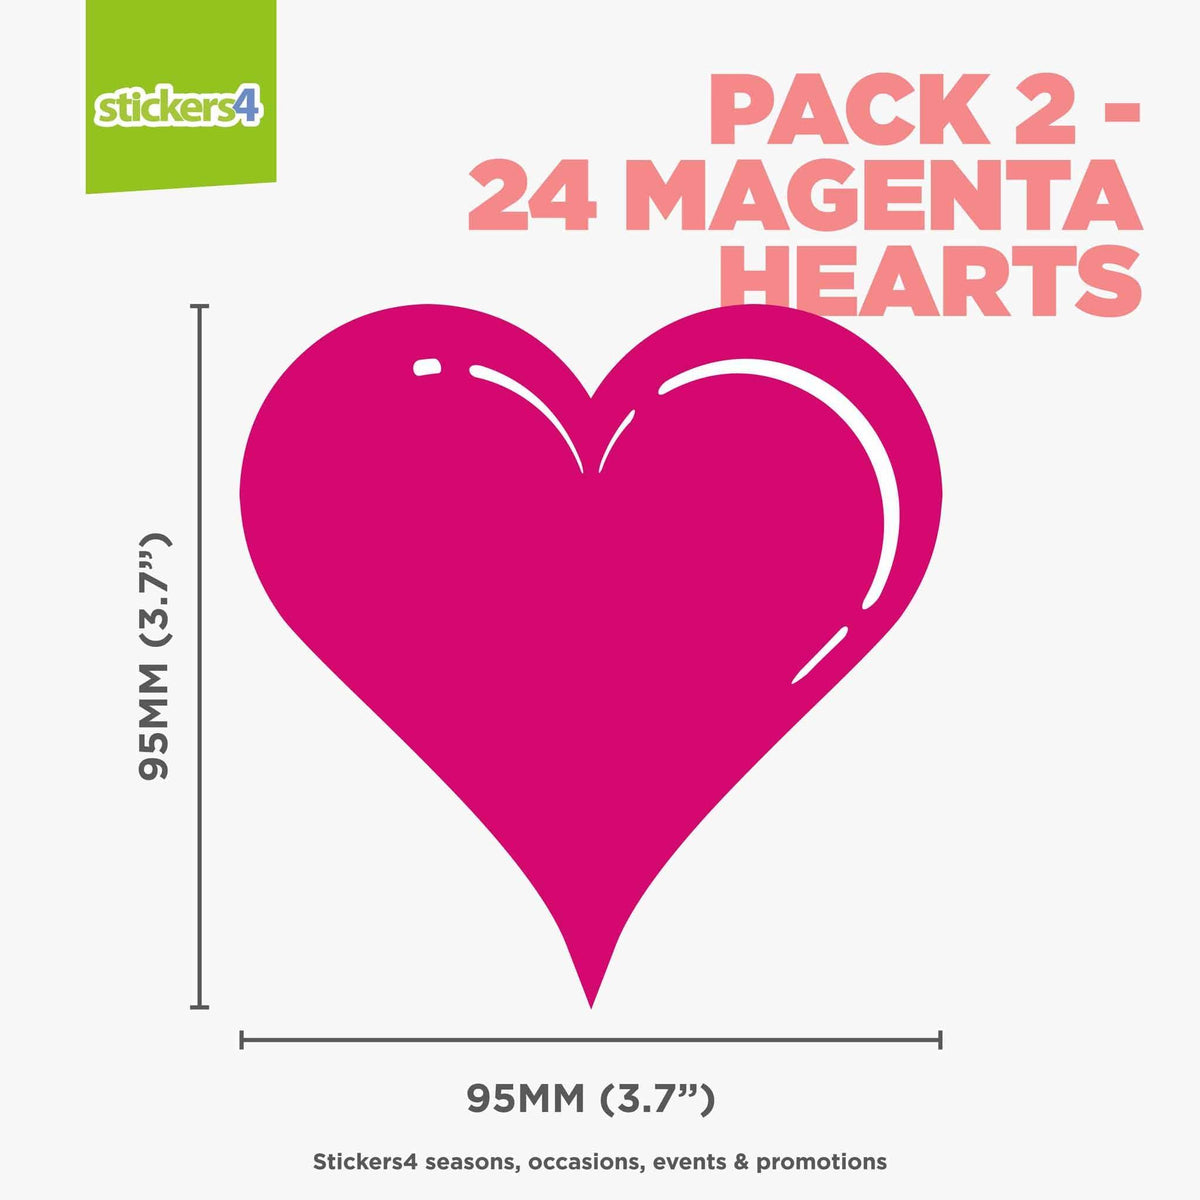 Static Cling Hearts: Pack 2 (24 Hearts @ 95mm)